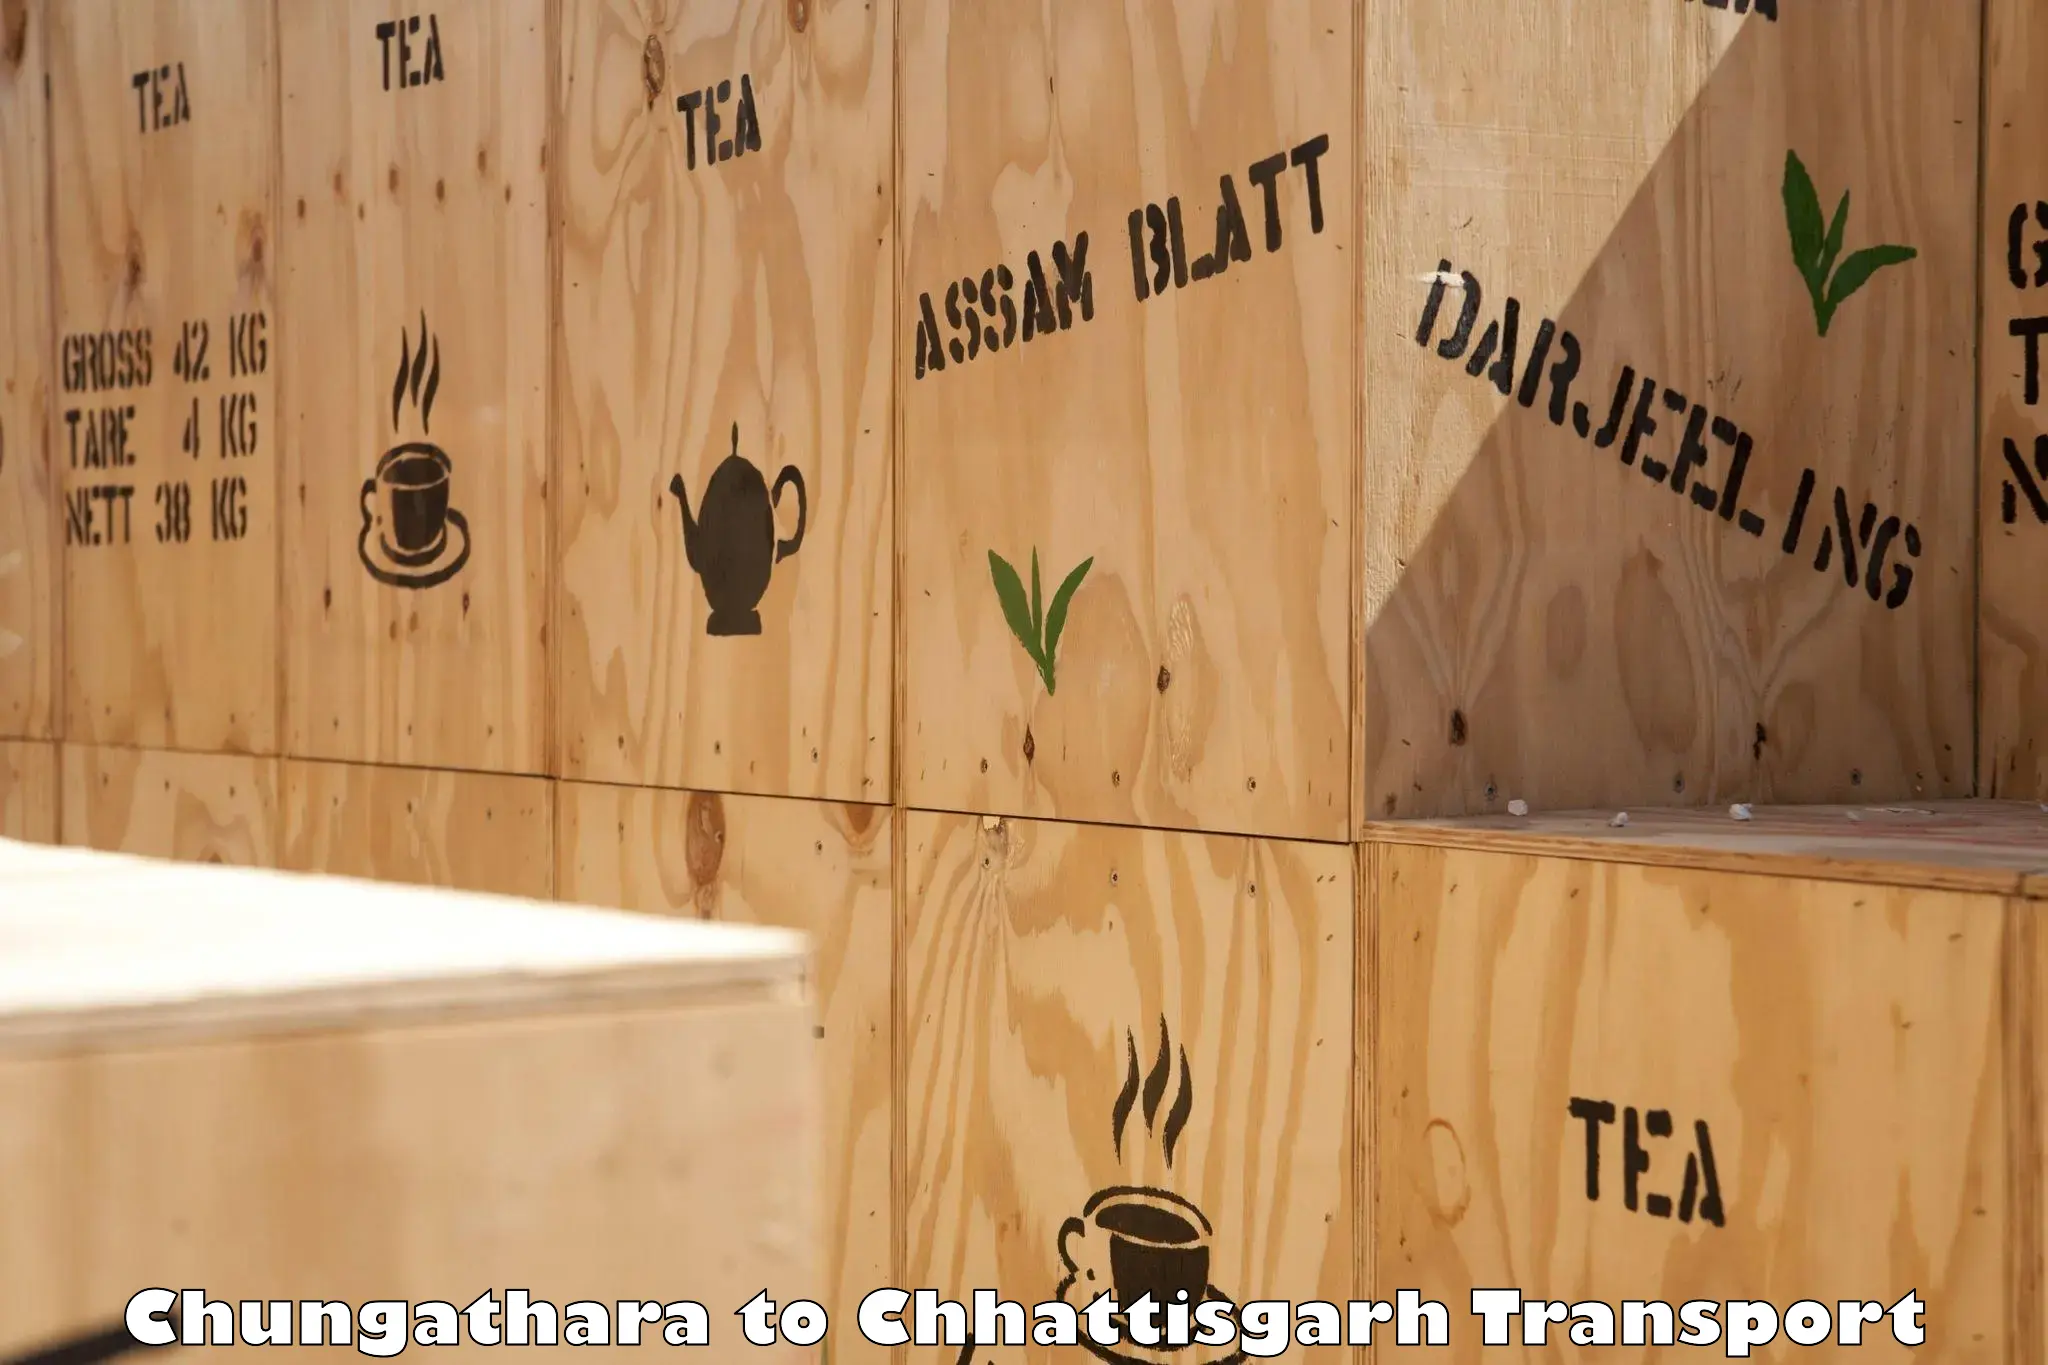 Interstate transport services in Chungathara to Raigarh